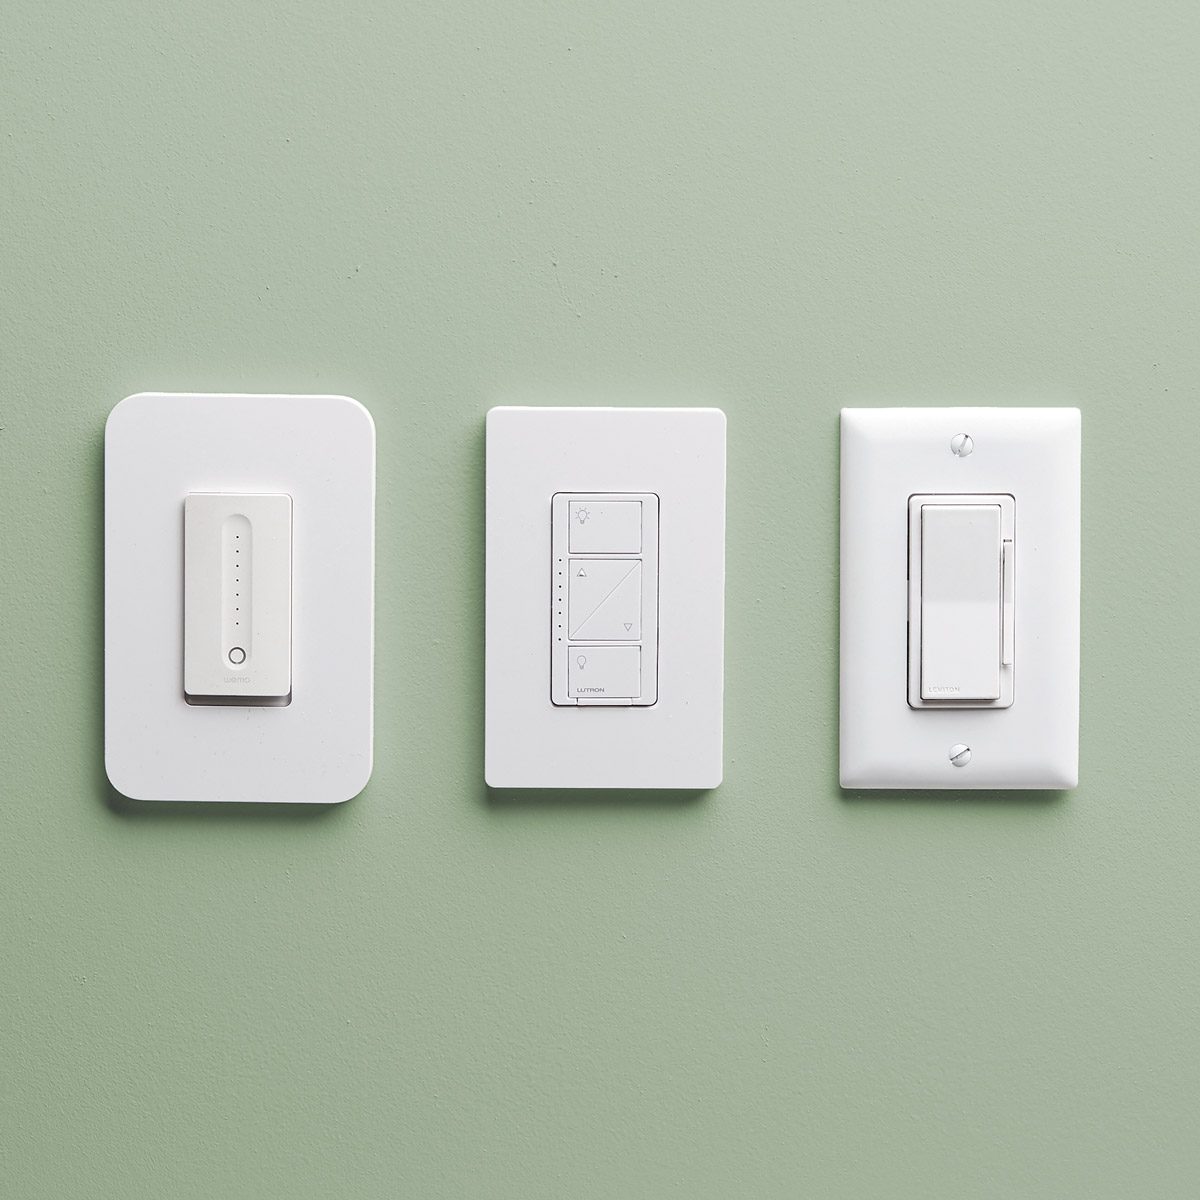 Touch light switches